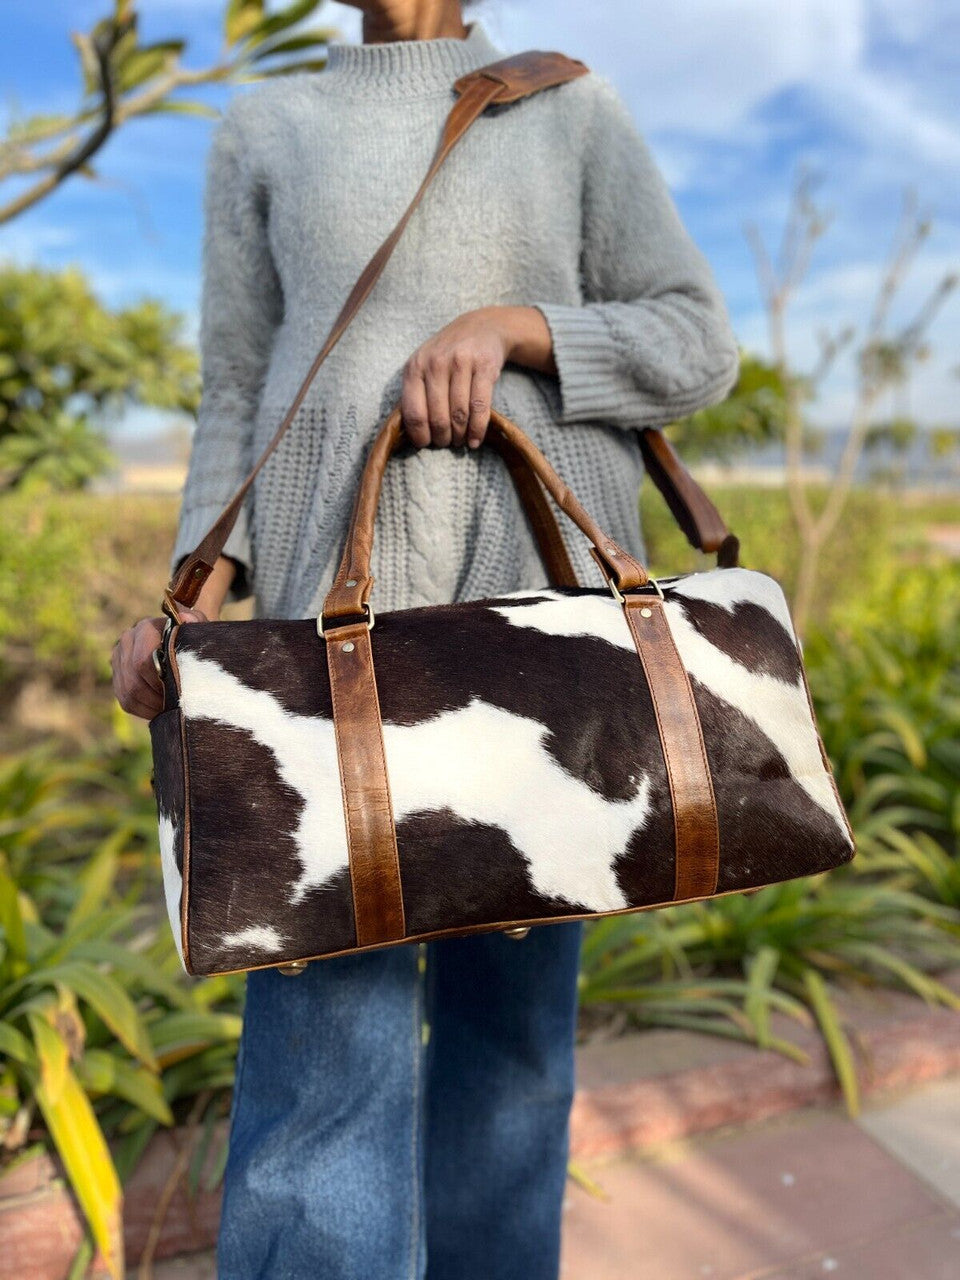 Durable cowhide travel bag displayed in a rustic outdoor setting.